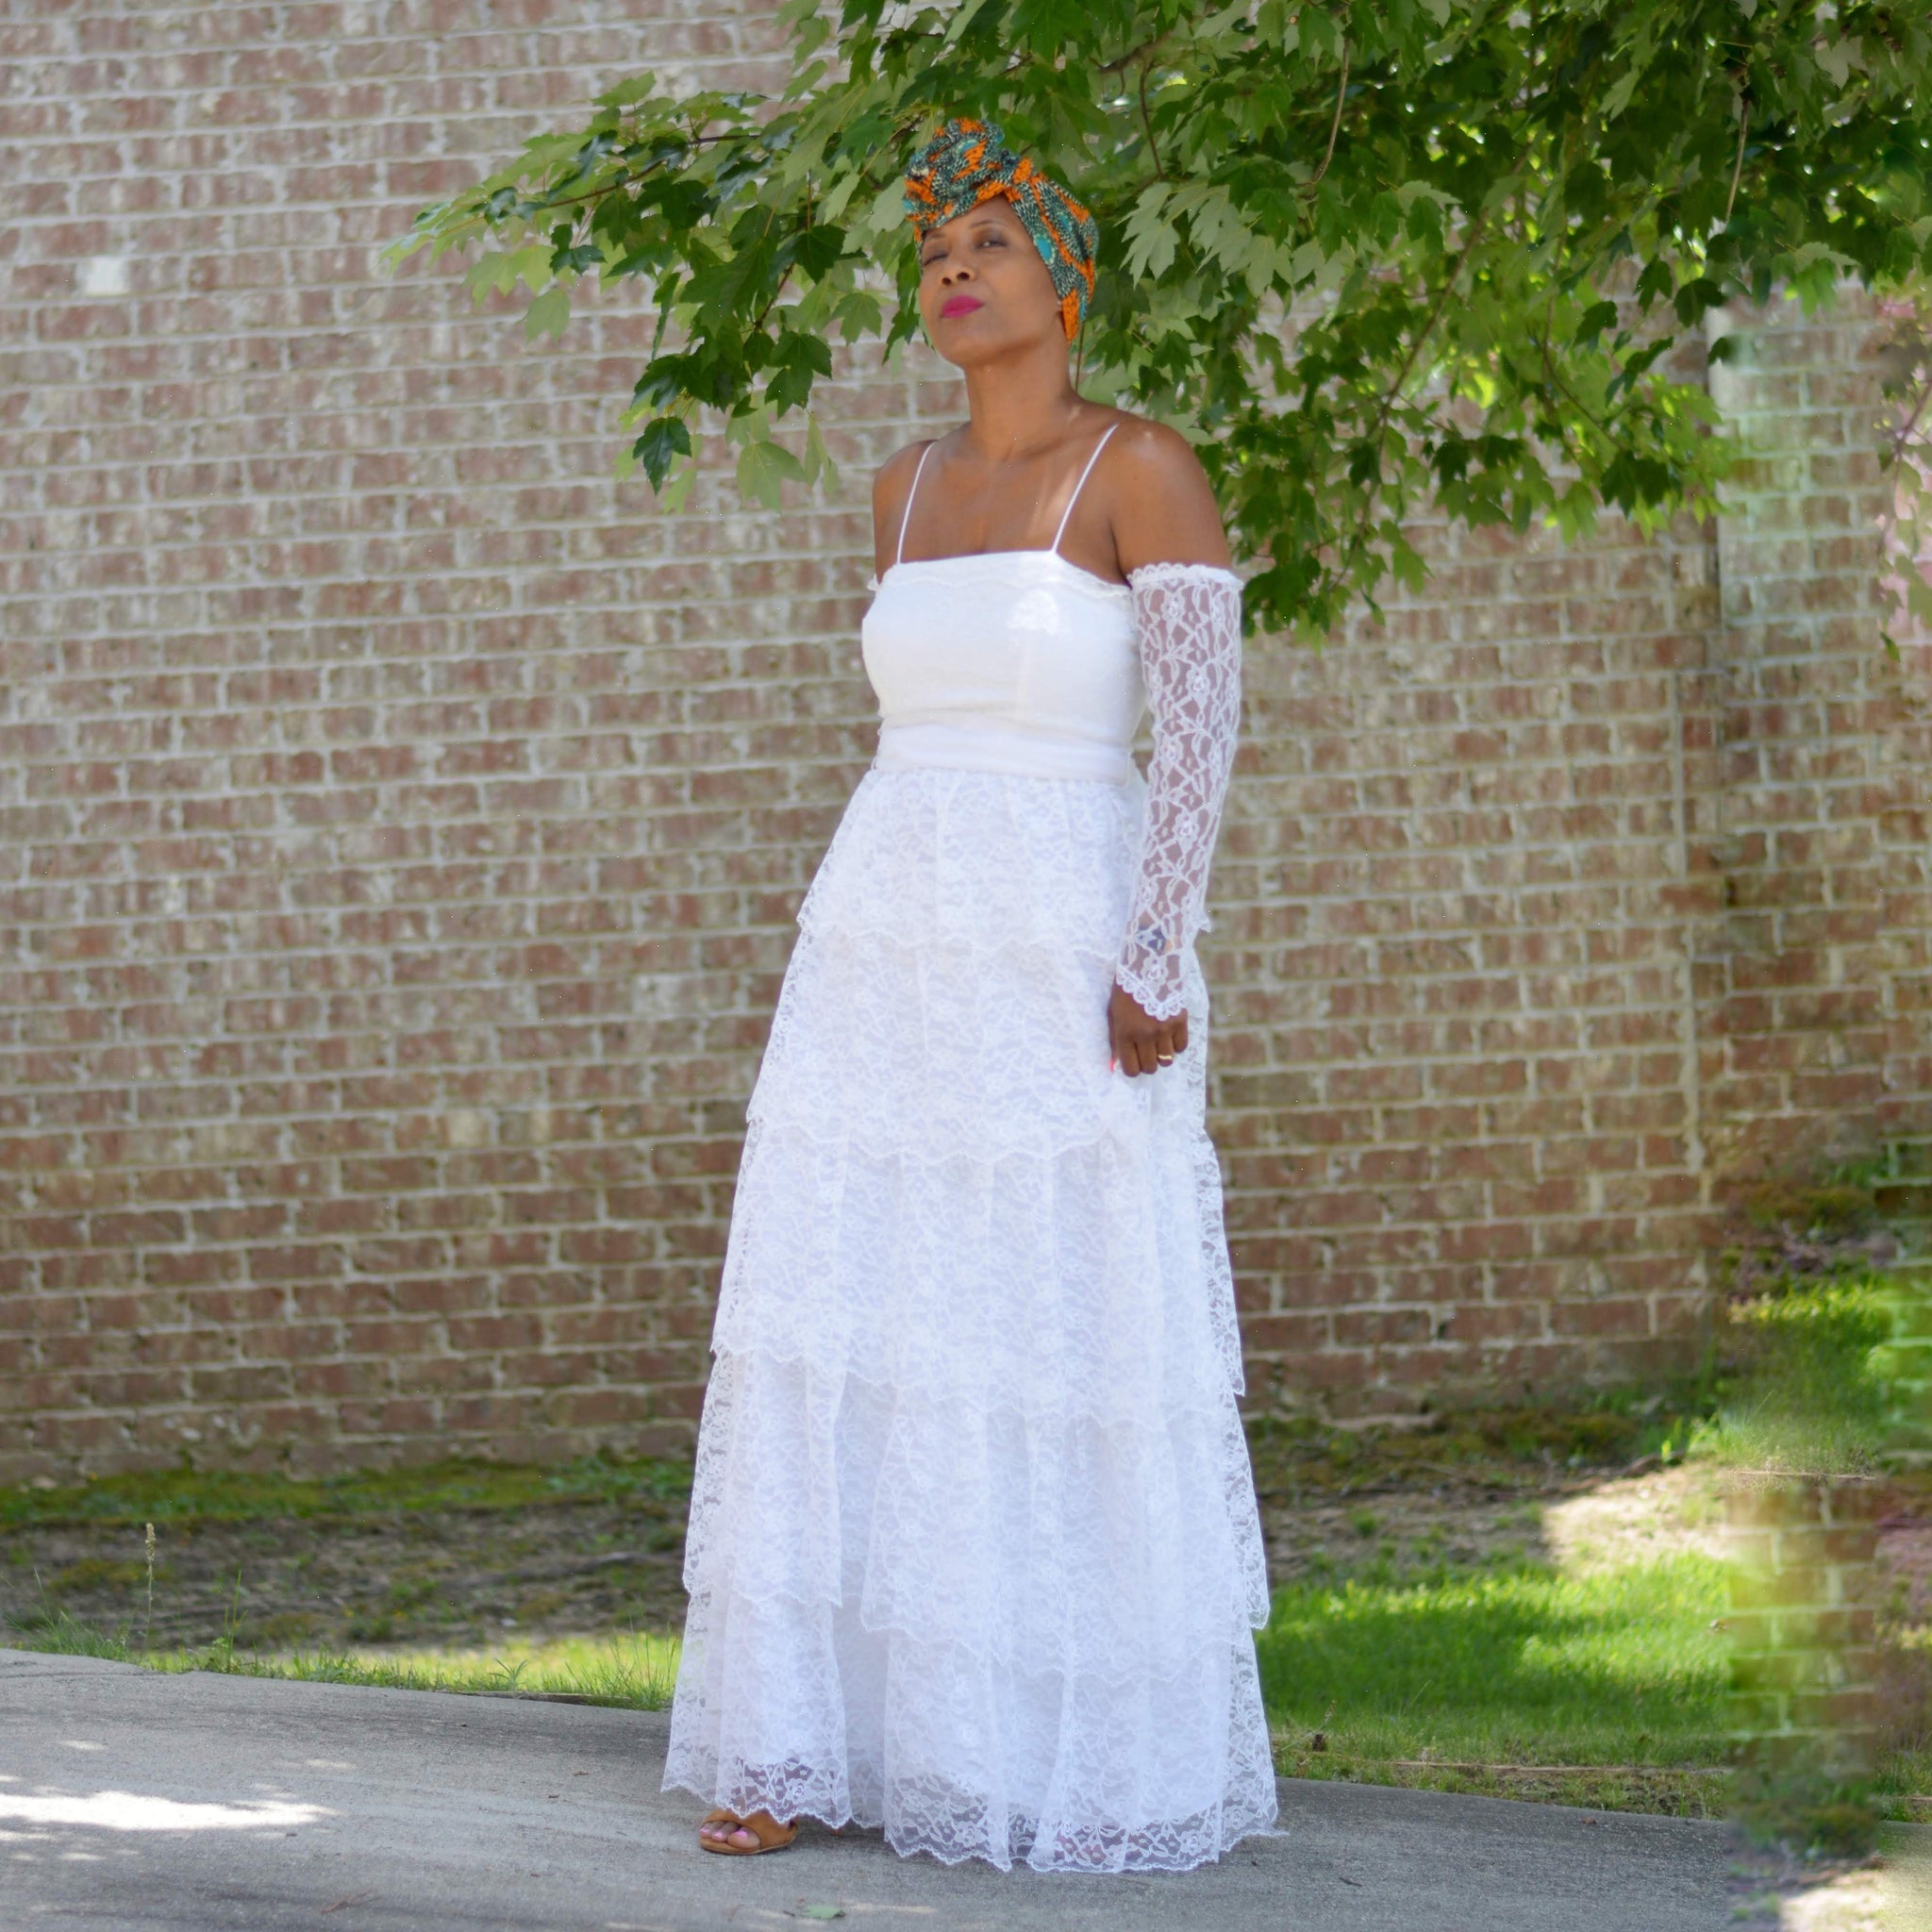 Vintage Tiered Maxi Dress White Lace Size Small